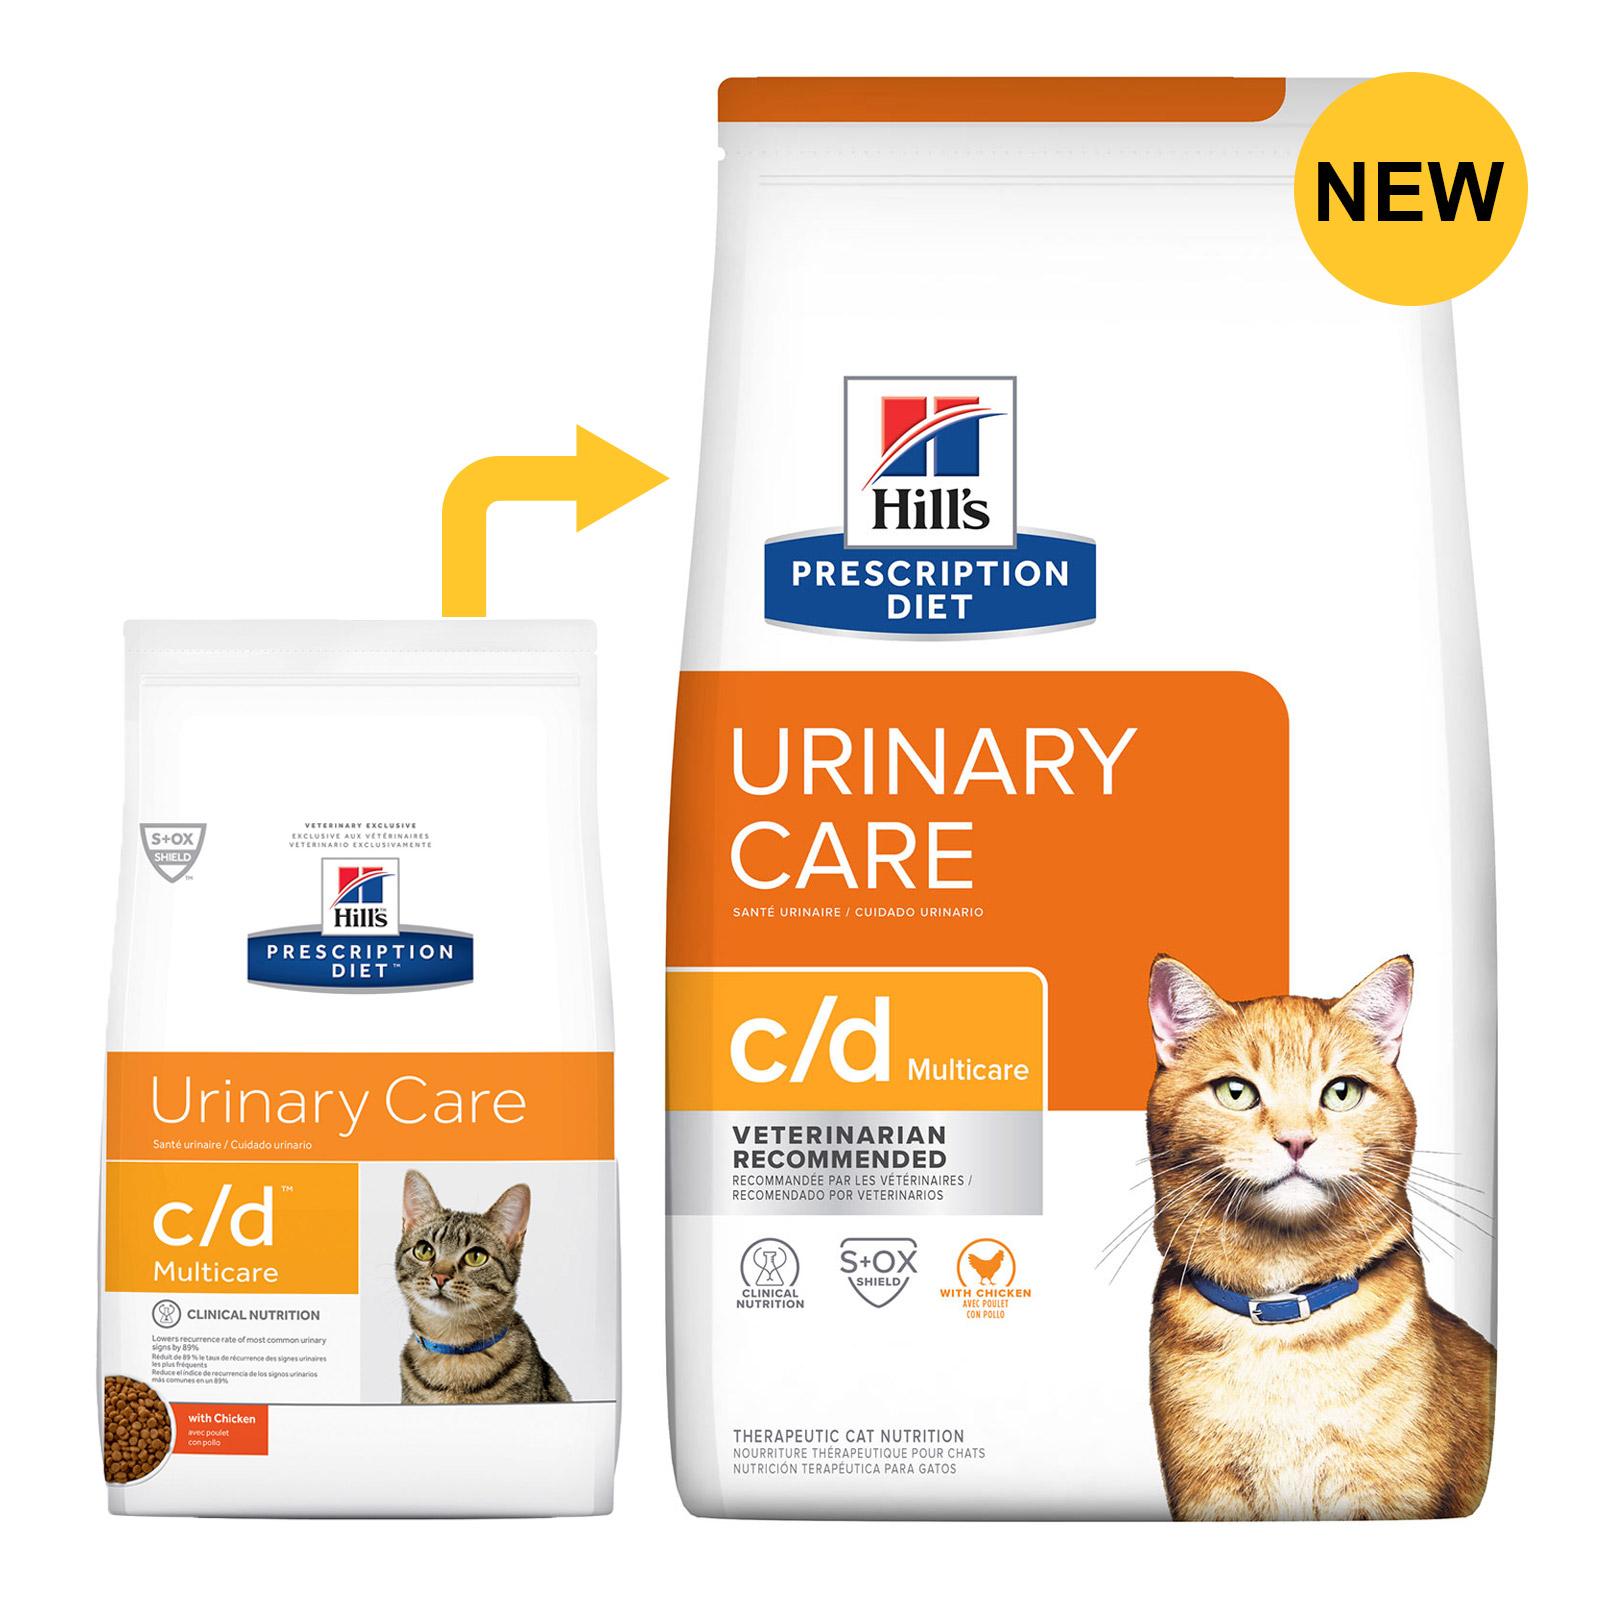 Hill's Prescription Diet c/d Feline Multicare Urinary Care with Chicken Dry for Food